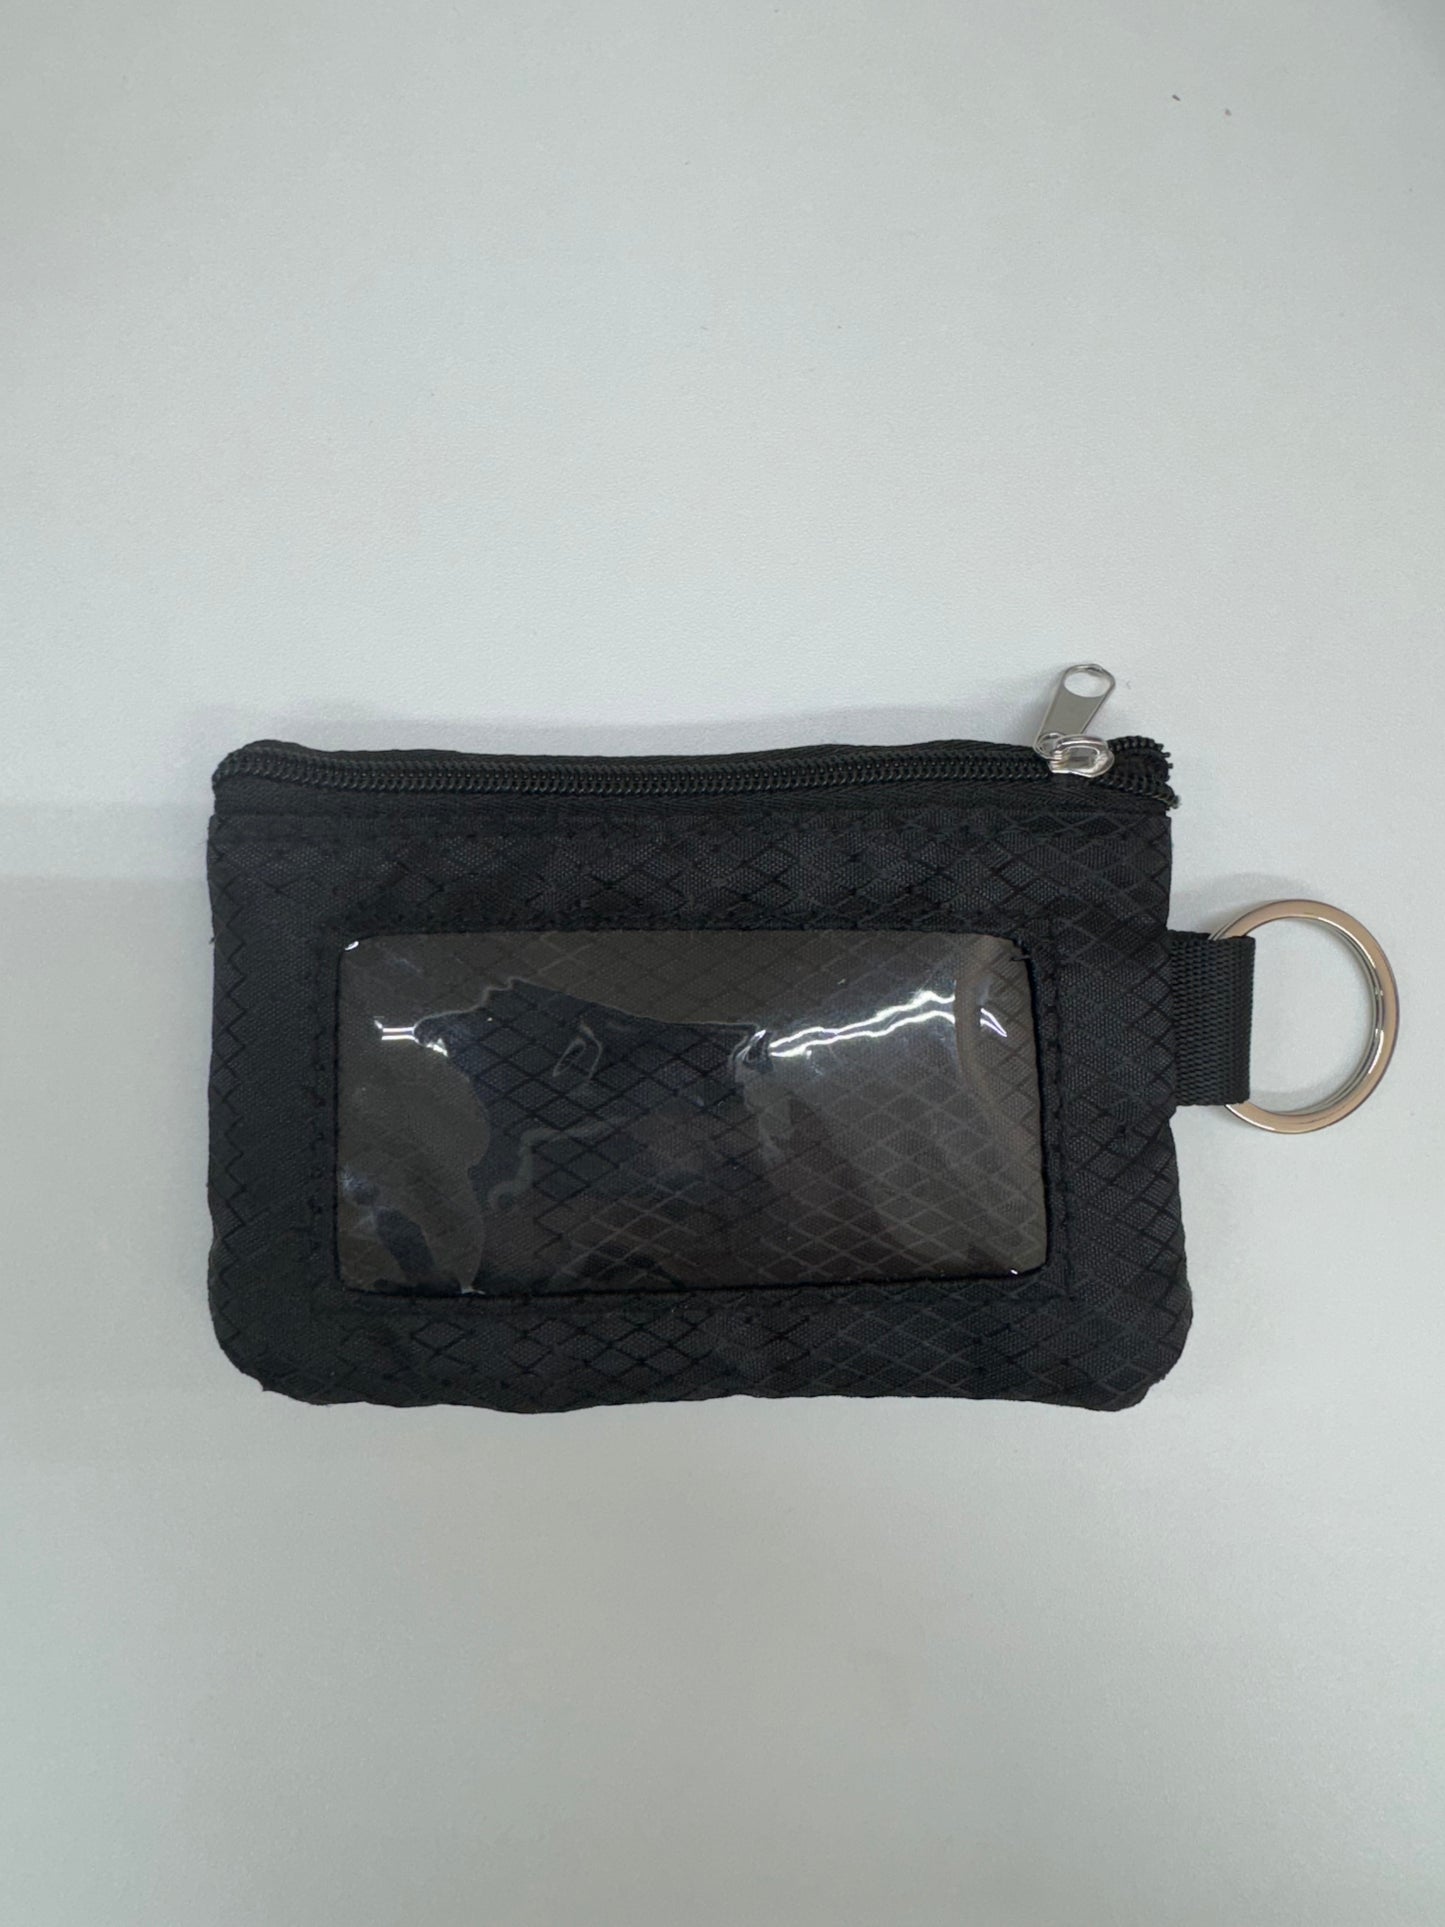 Small RFID Credit Card & ID Zippered Wallet With Removable Lanyard - 4.5 x 3 inches